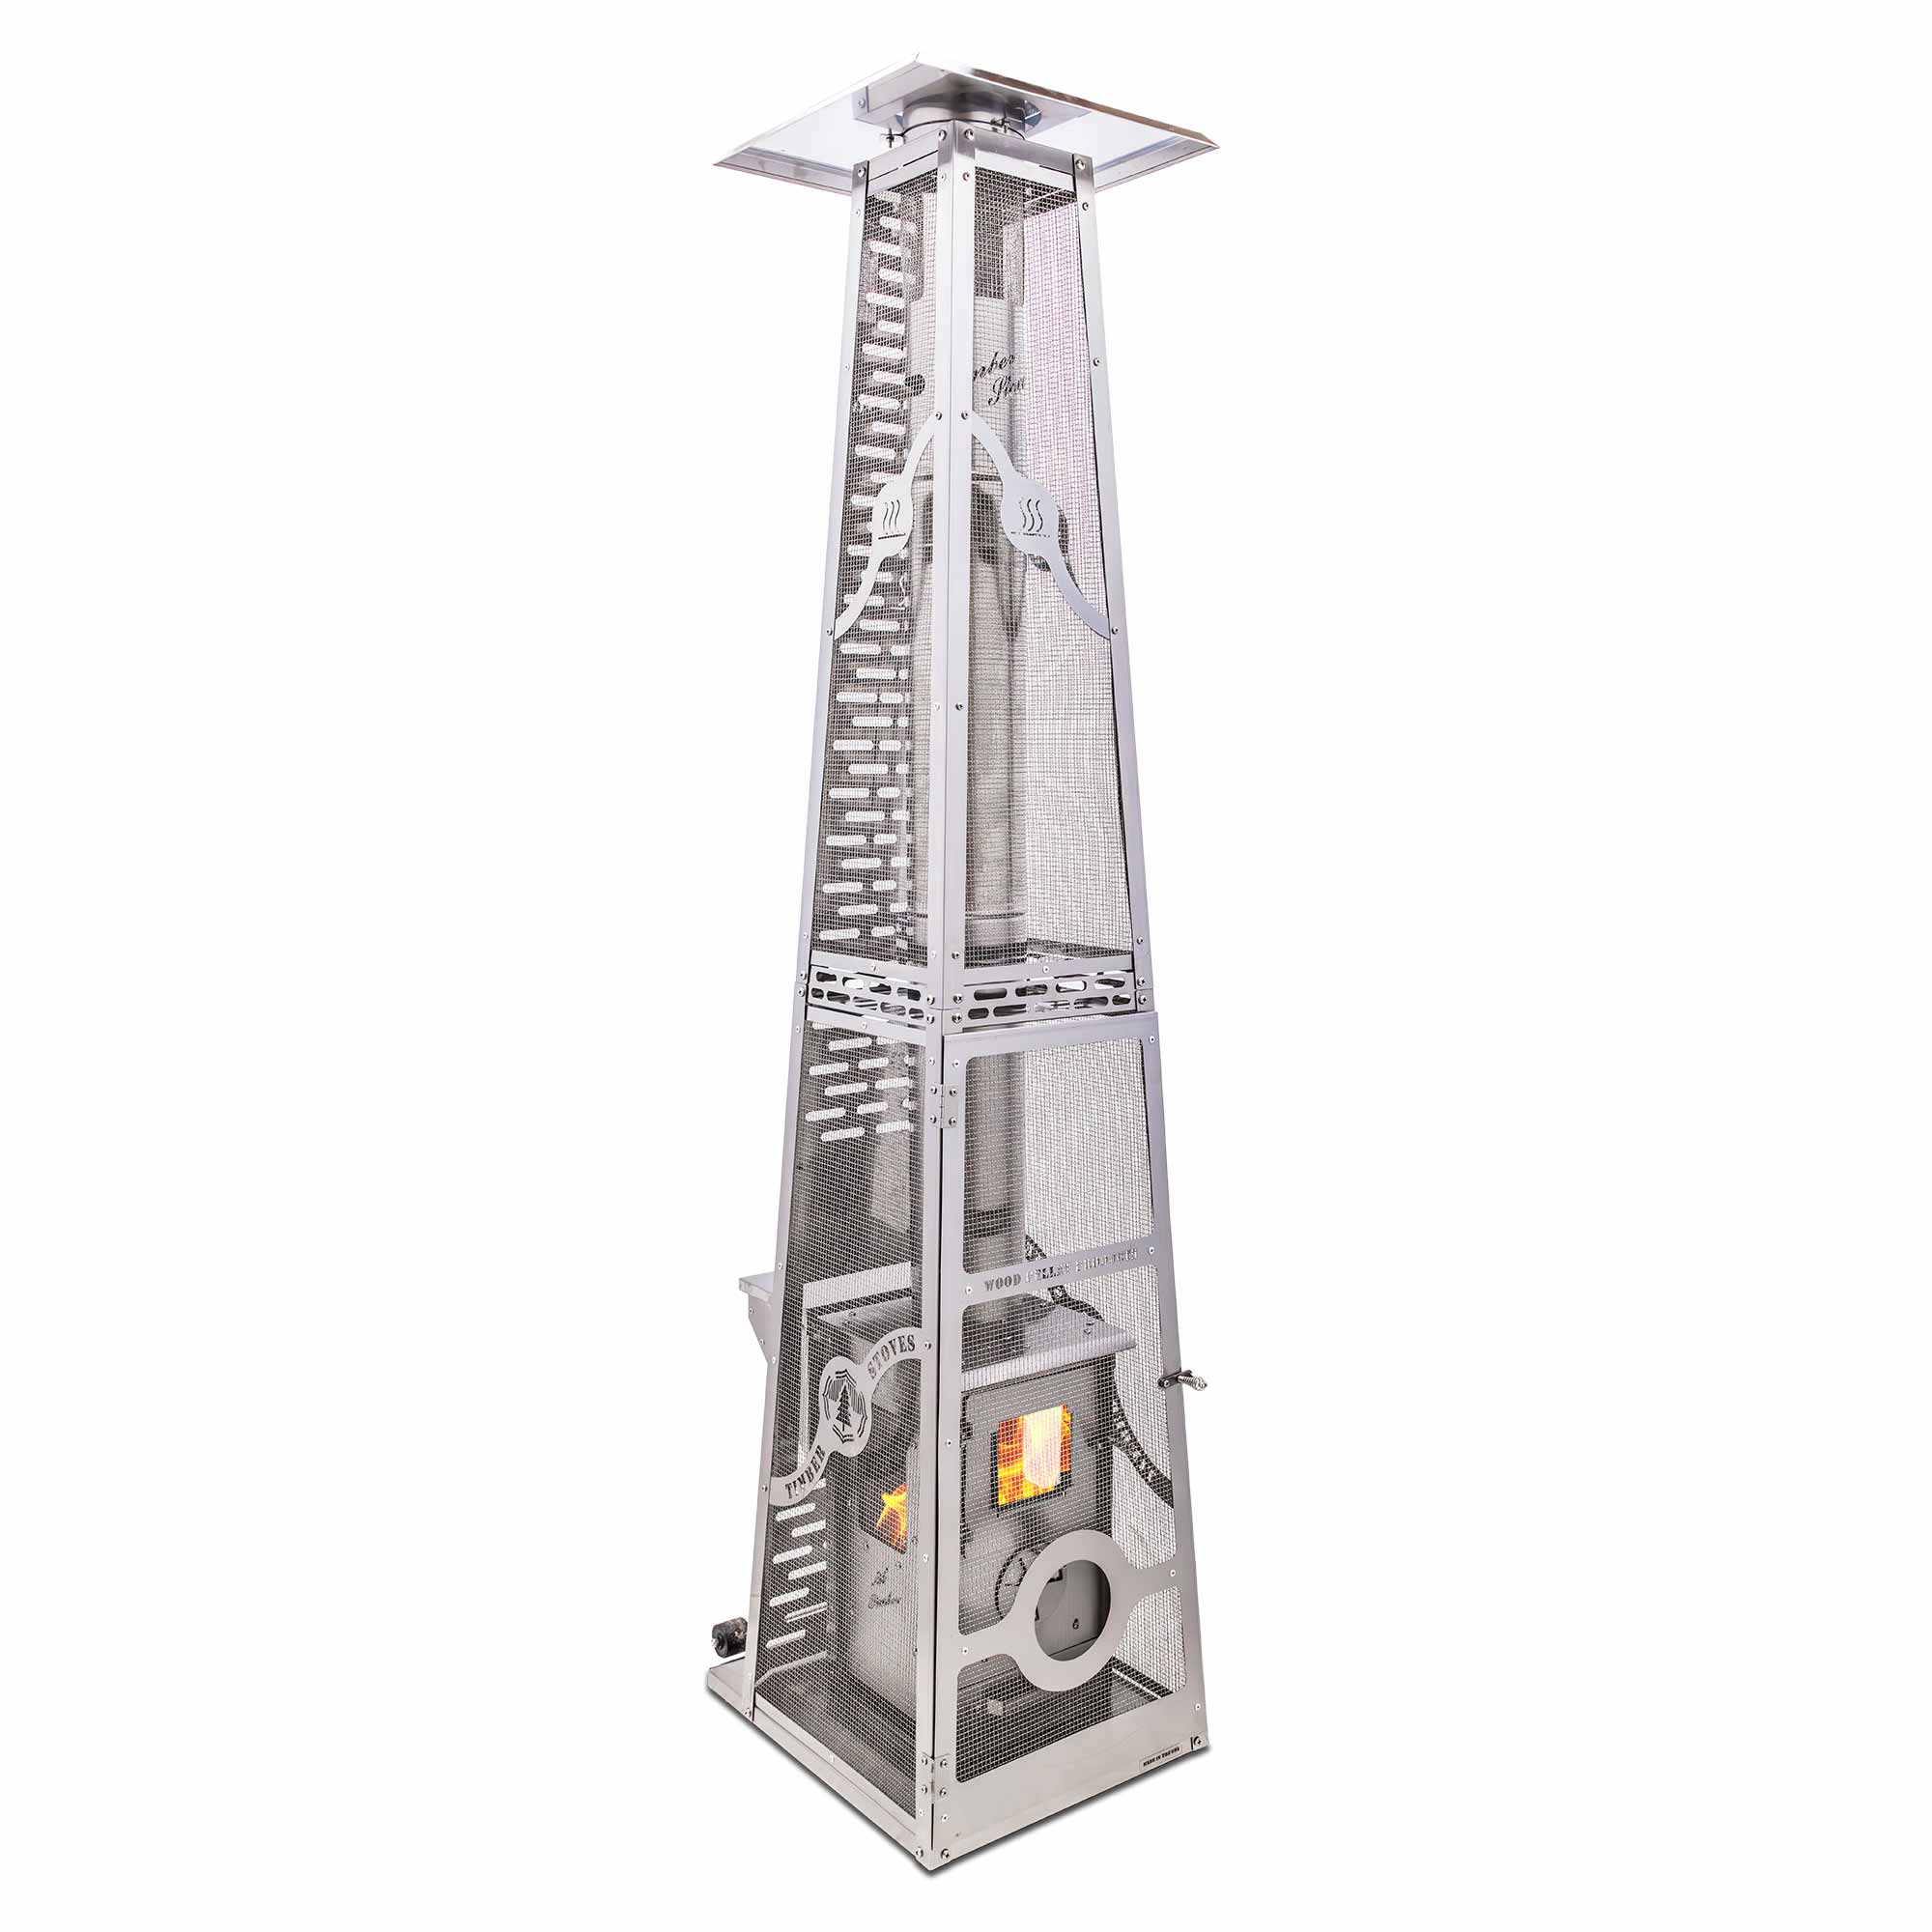 Solo Stove 72,000 BTU Pellet-Fueled Freestanding Tower Patio